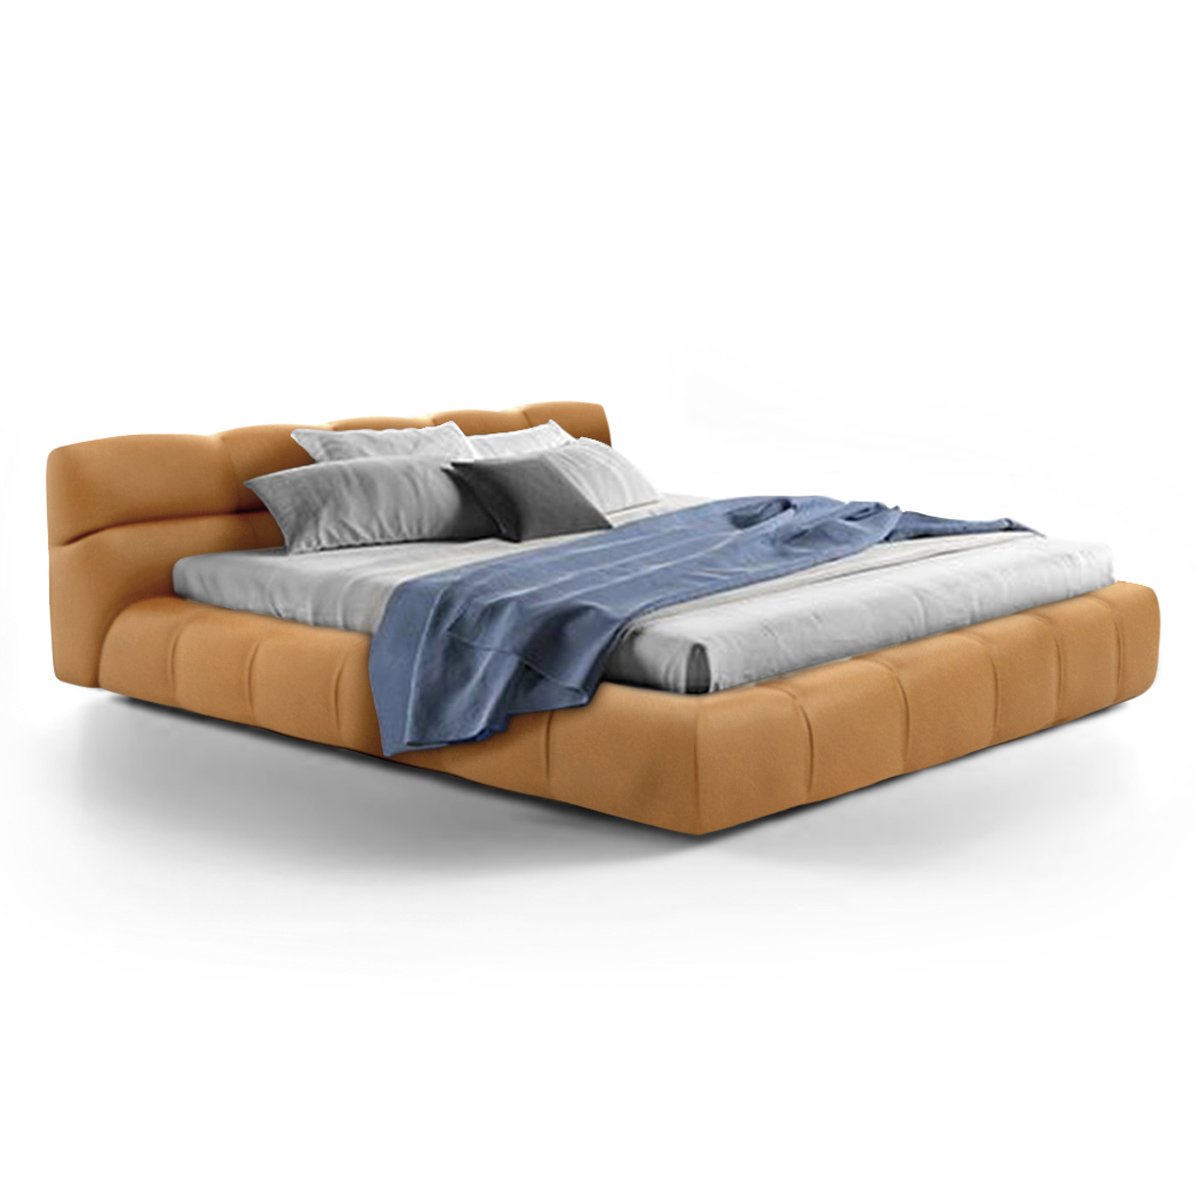 Tufted Bed Aniline Leather-Beige / King Size